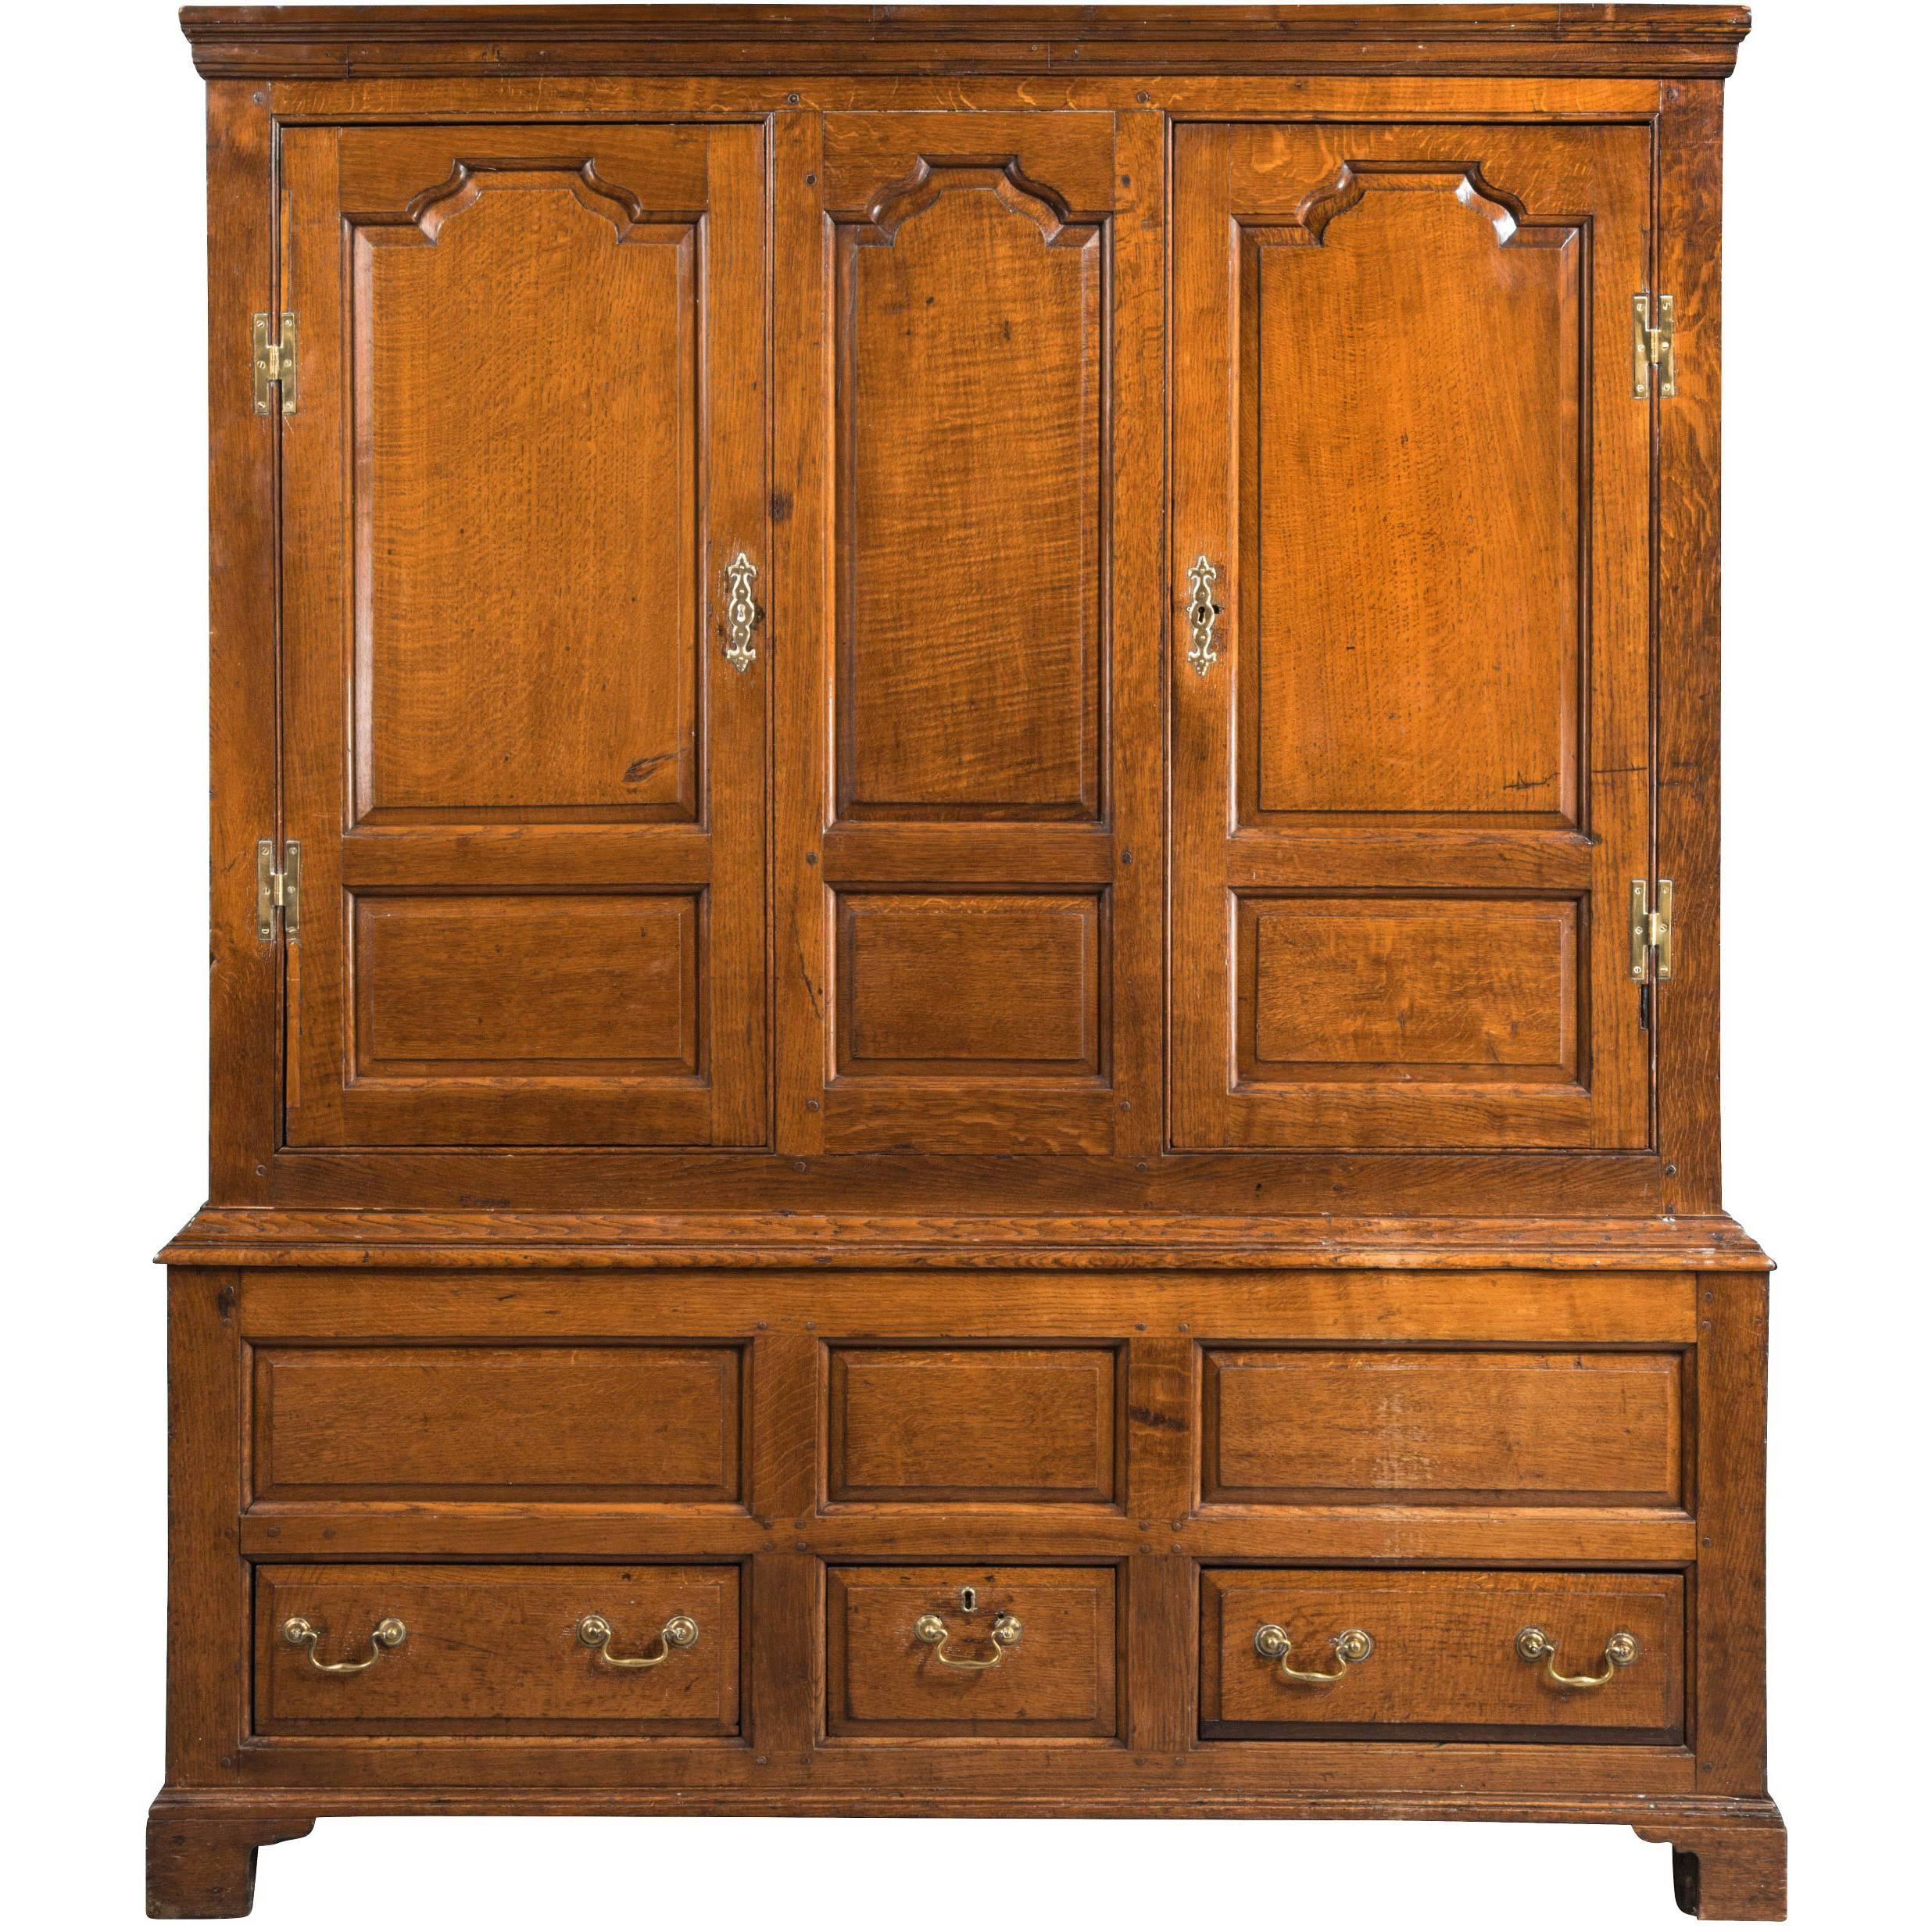 Mid-18th Century Oak Cupboard with Fielded Panels to the Doors For Sale